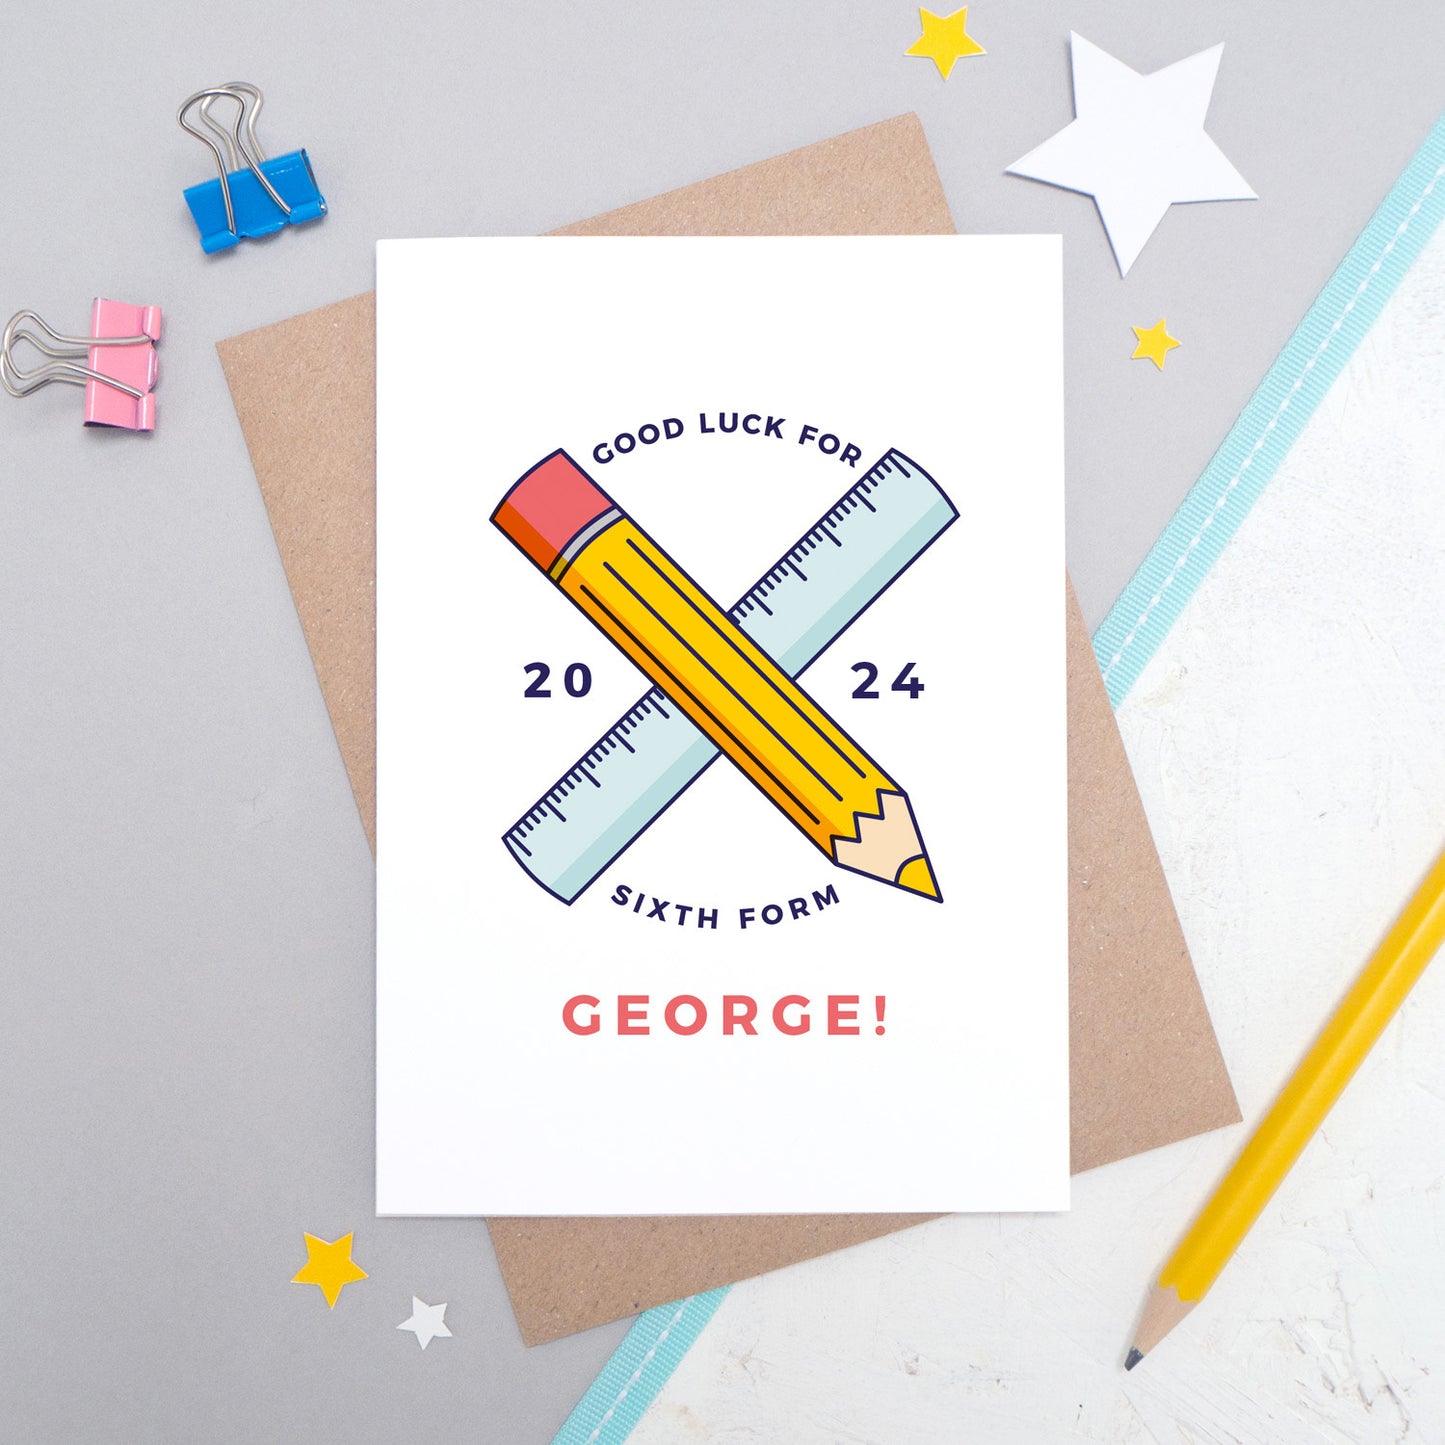 A good luck for 6th form, personalised back to school card personalised with a young persons name, and a pencil and ruler illustration. The card is laid on it's kraft brown envelope on a grey and white background.